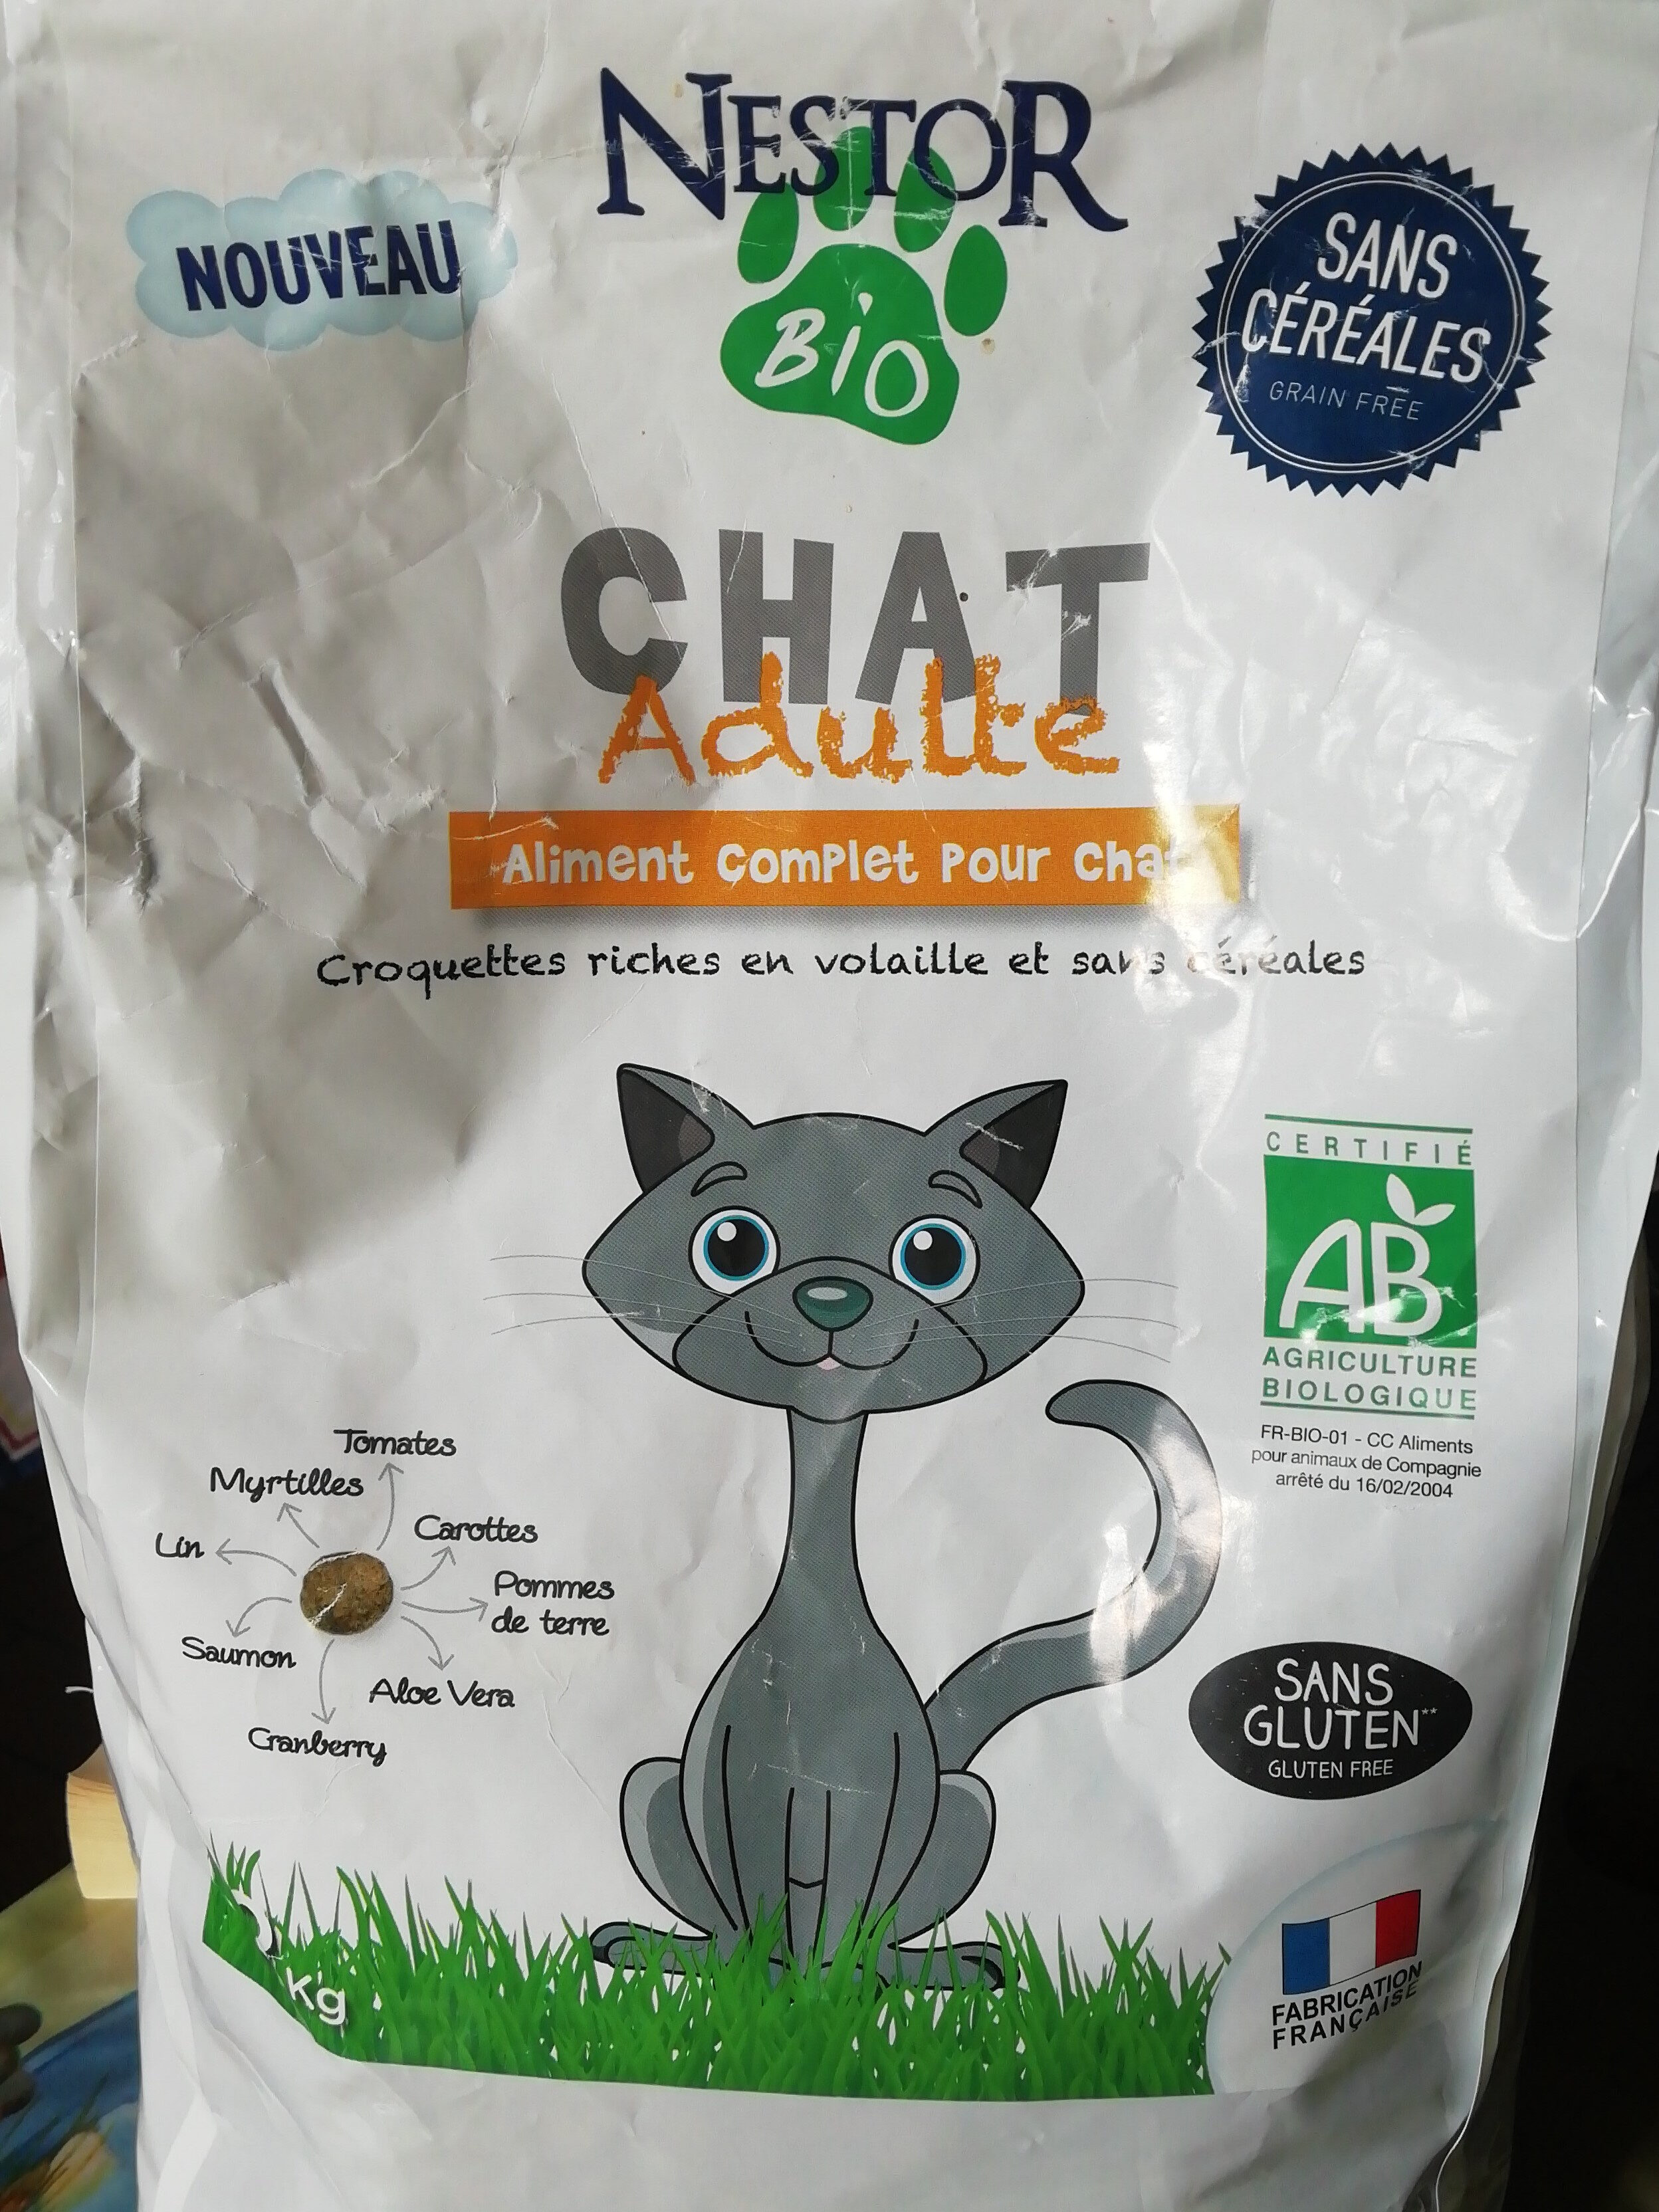 Nestor bio croquettes chat adulte - Product - fr